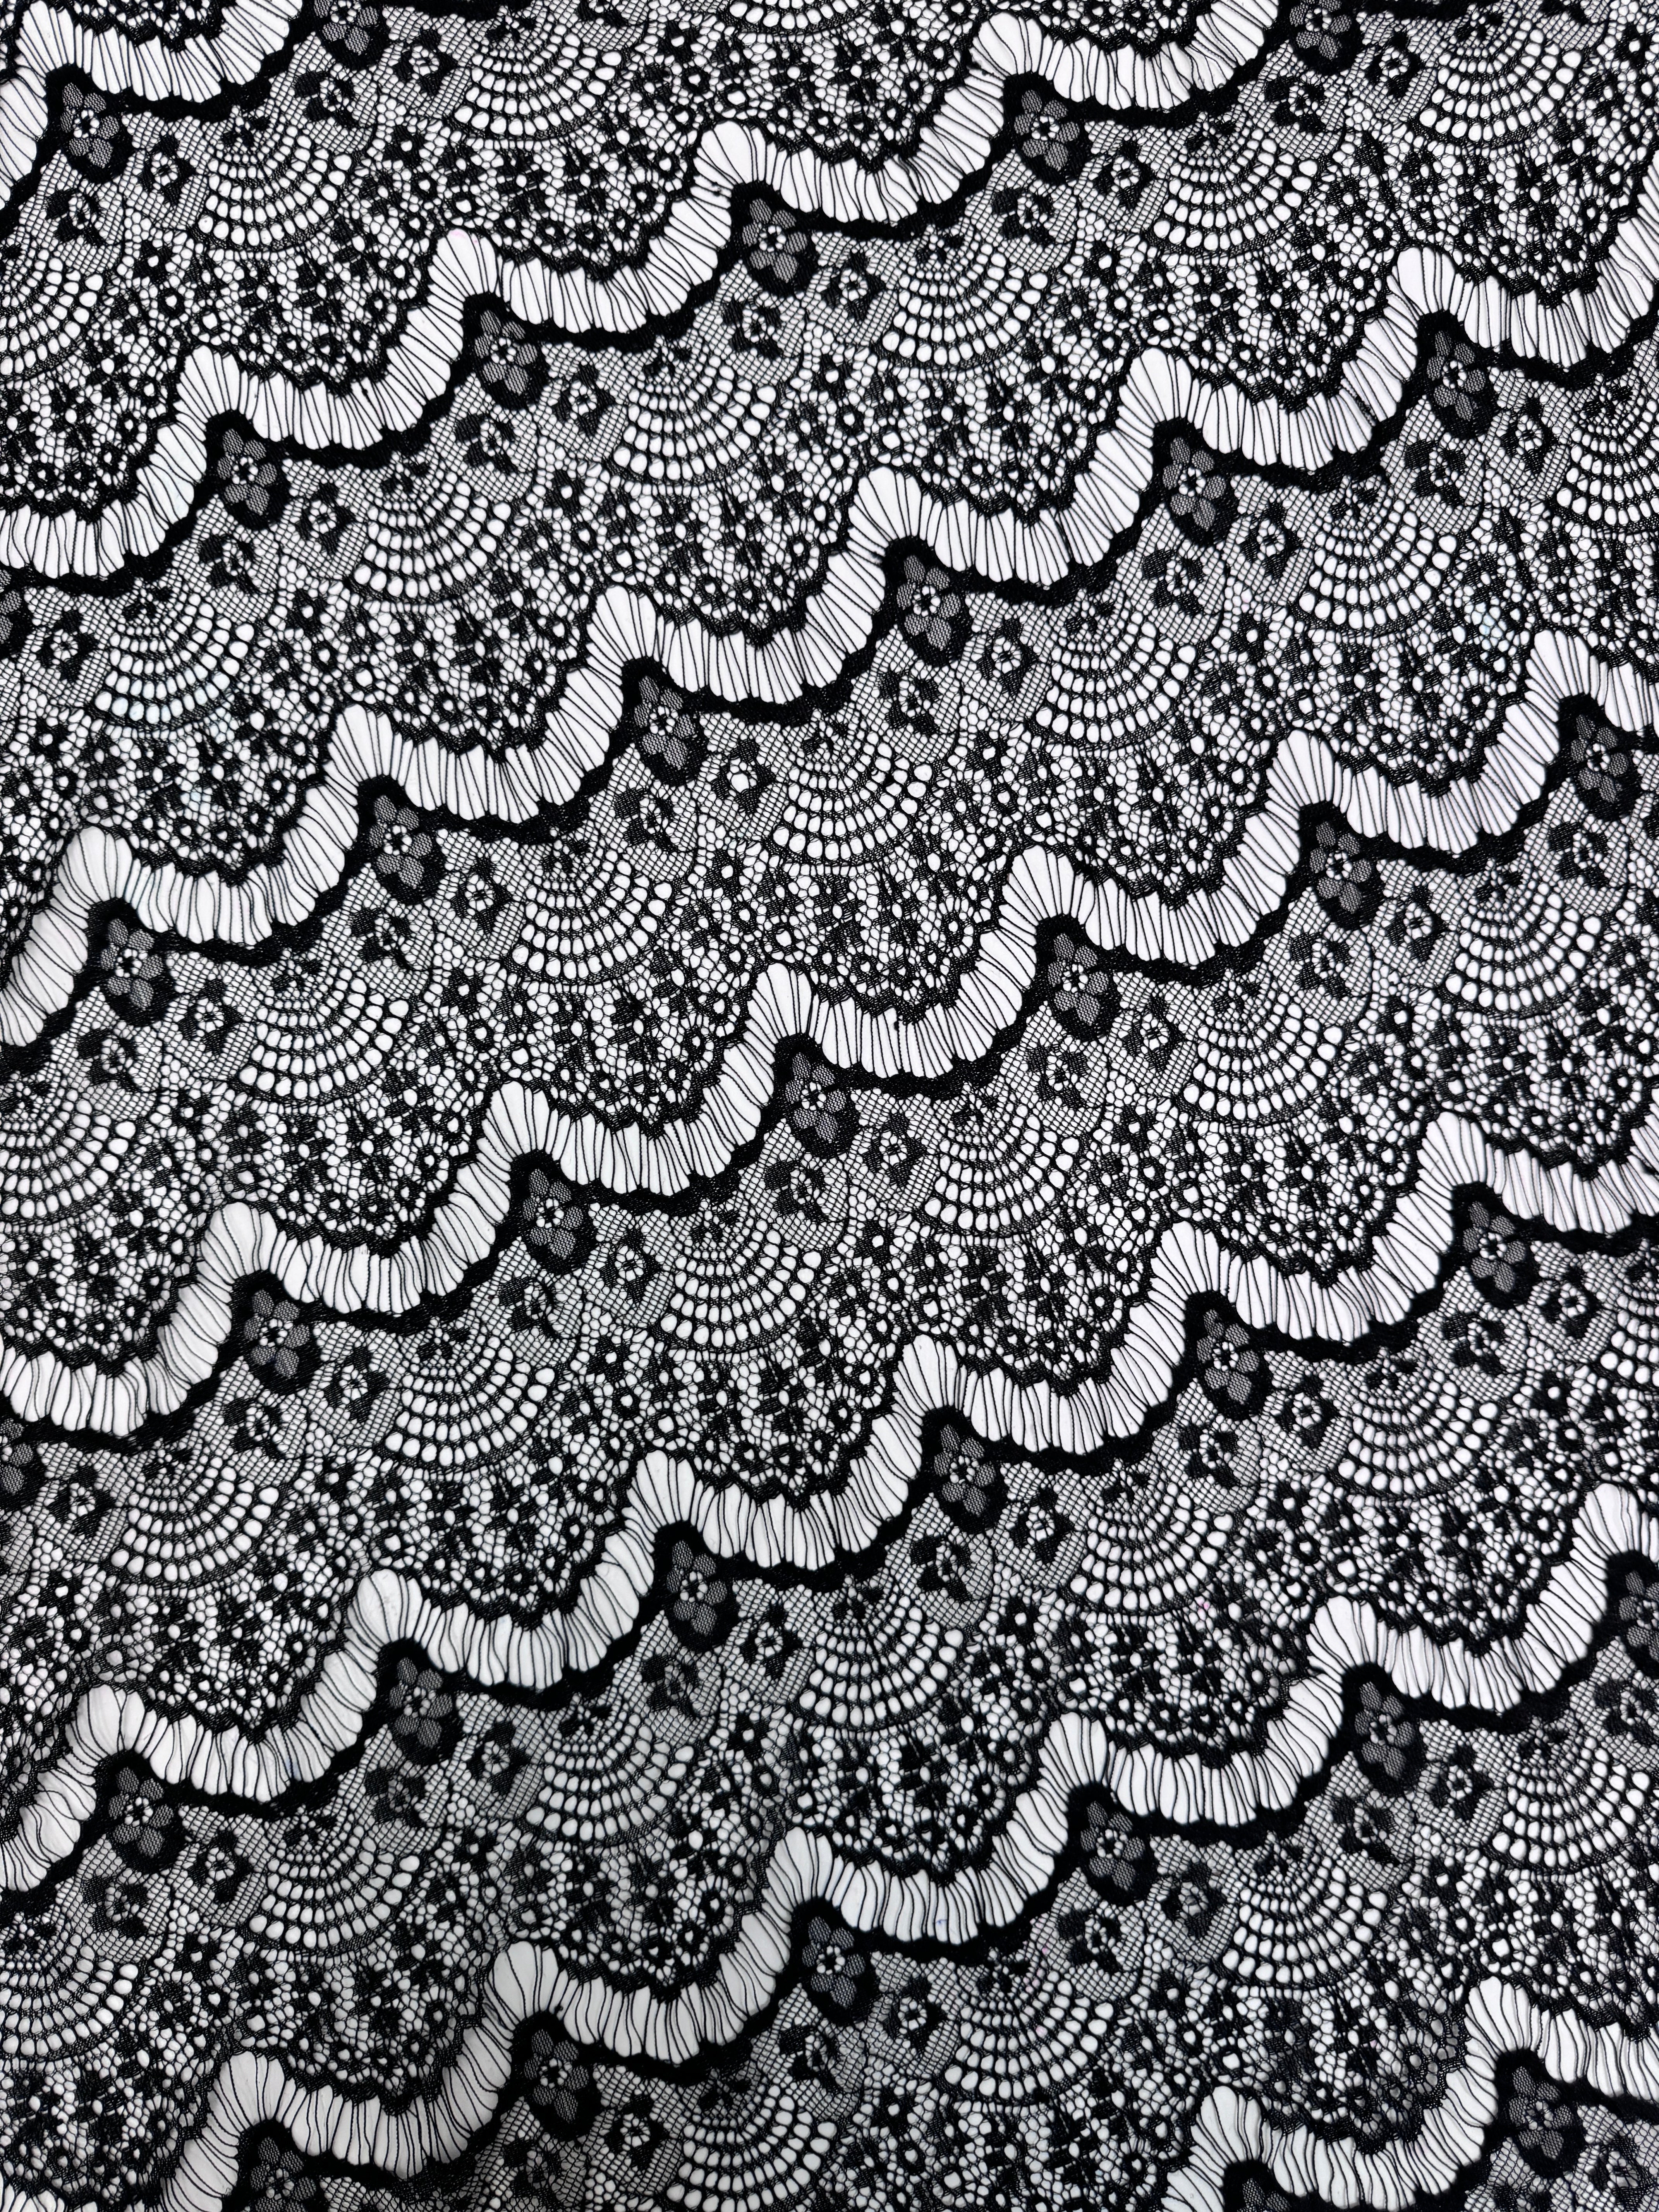 Black French Chantilly Floral Lingerie Lace, jet black Chantilly Floral Lingerie Lace, dark gray Chantilly Floral Lingerie Lace, Chantilly Floral Lingerie Lace for woman, Chantilly Floral Lingerie Lace for bride, Chantilly Floral Lingerie Lace for party wear, Chantilly Floral Lingerie Lace in low price, Chantilly Floral Lingerie Lace on discount